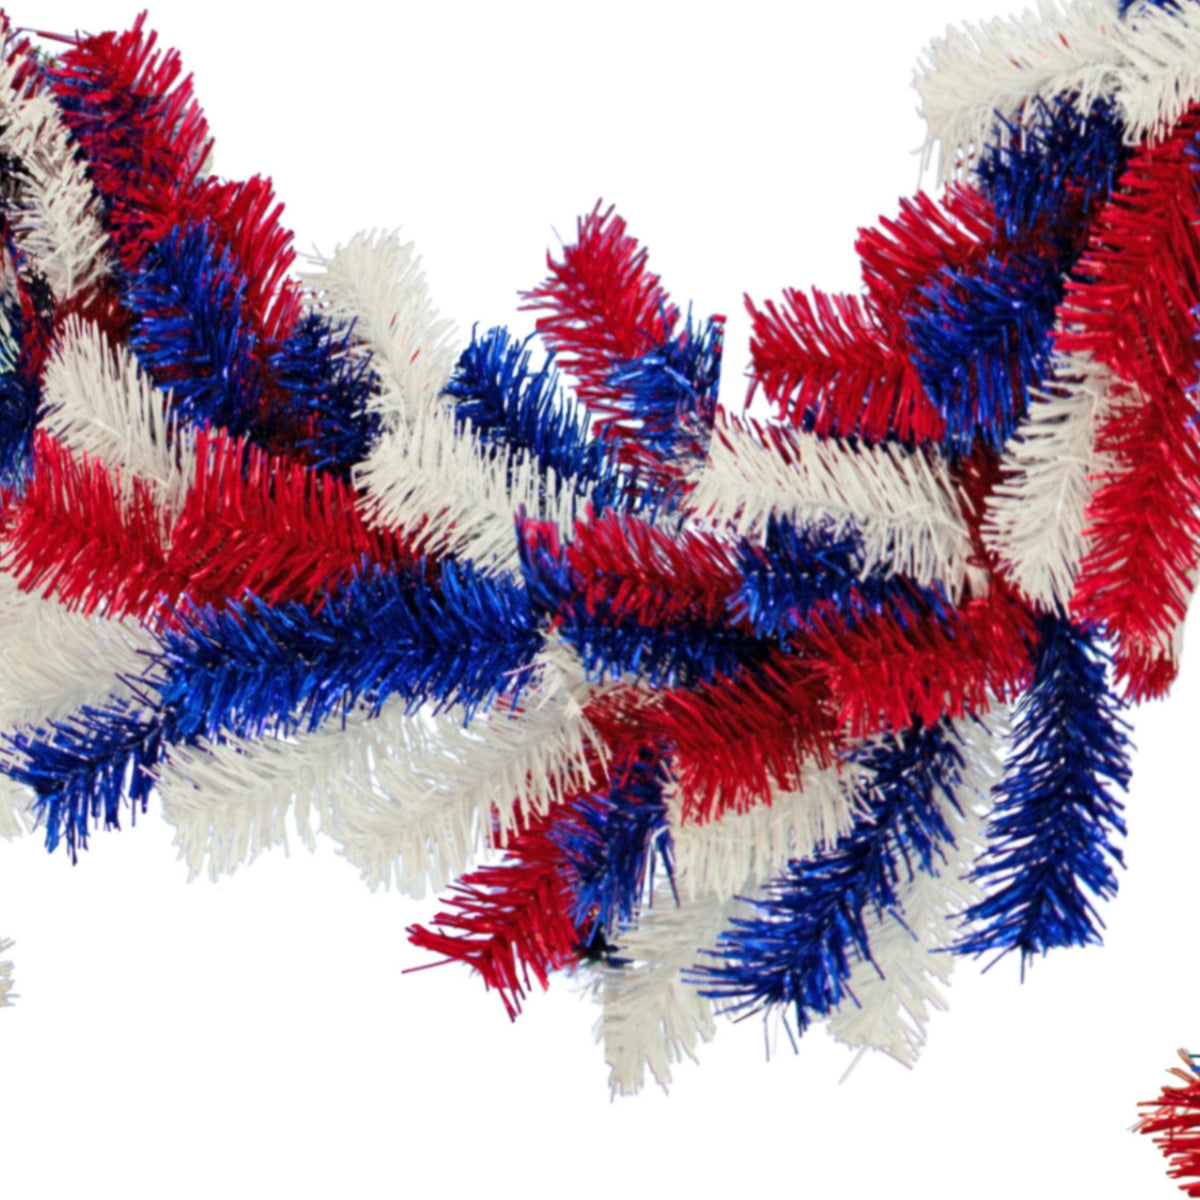 Shop for Lee Display's brand new 6FT Shiny Red, White, and Blue 4th of July Mixed Tinsel Brush Garlands on sale now at leedisplay.com.  Middle